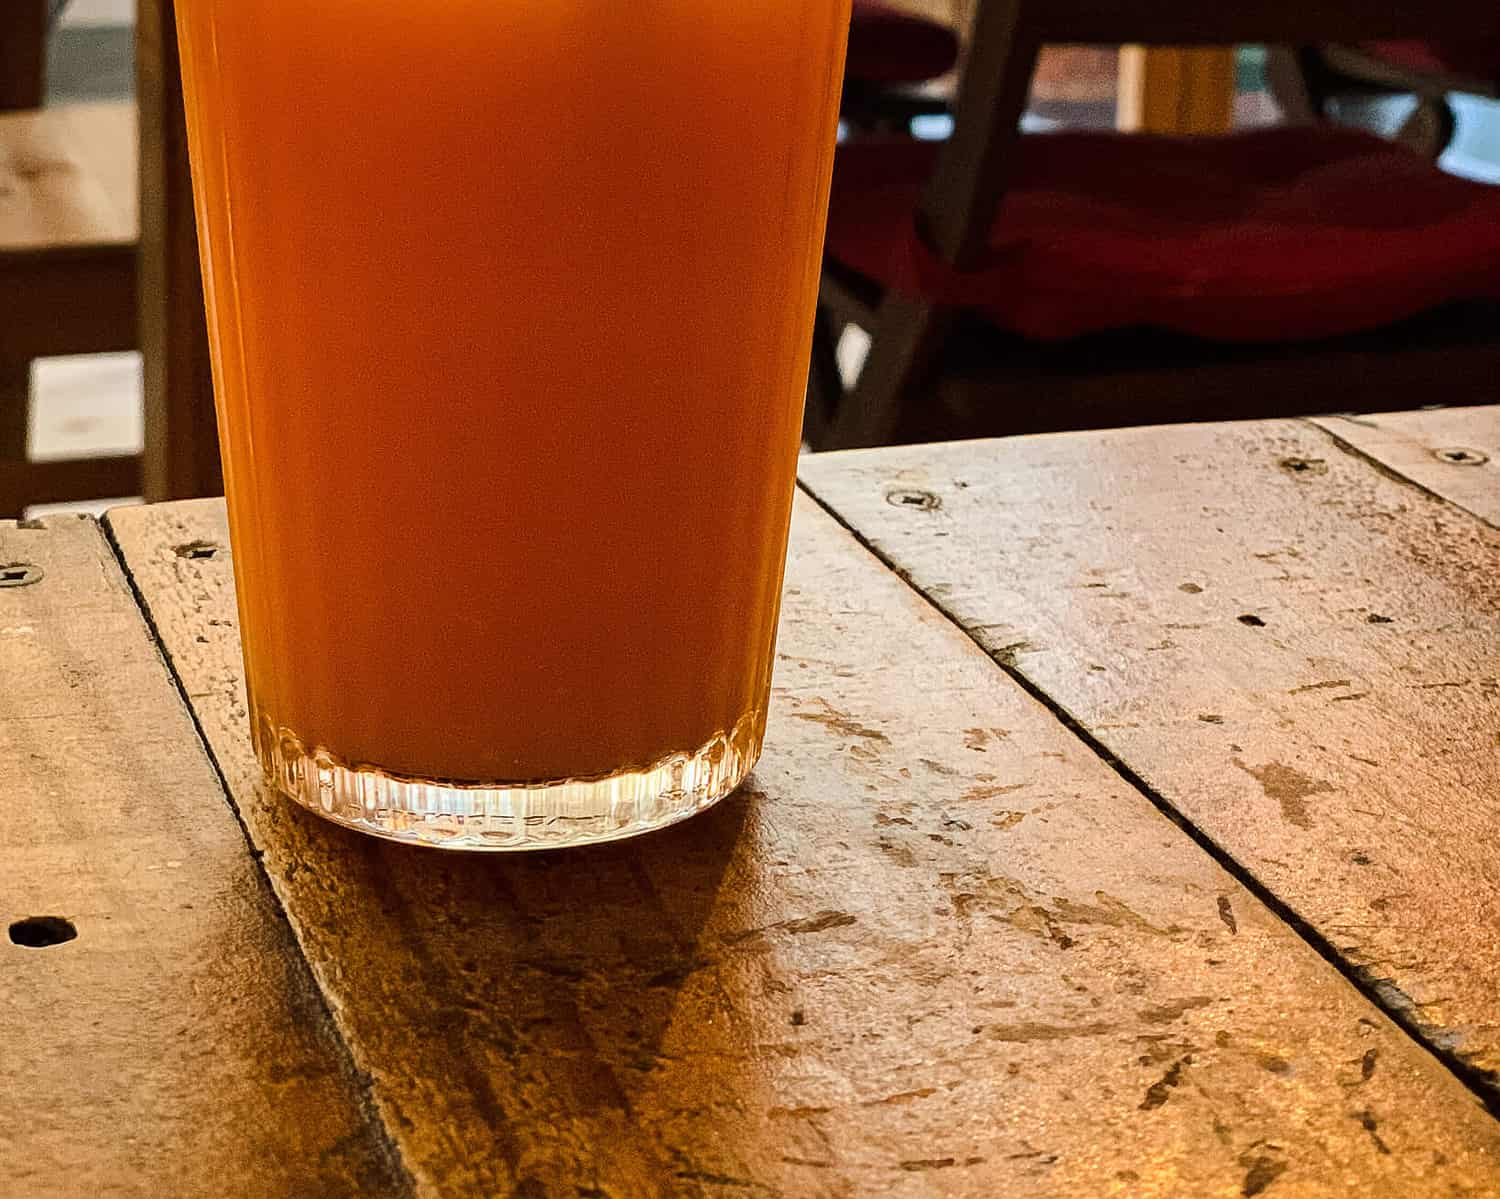 Juice at the juice house